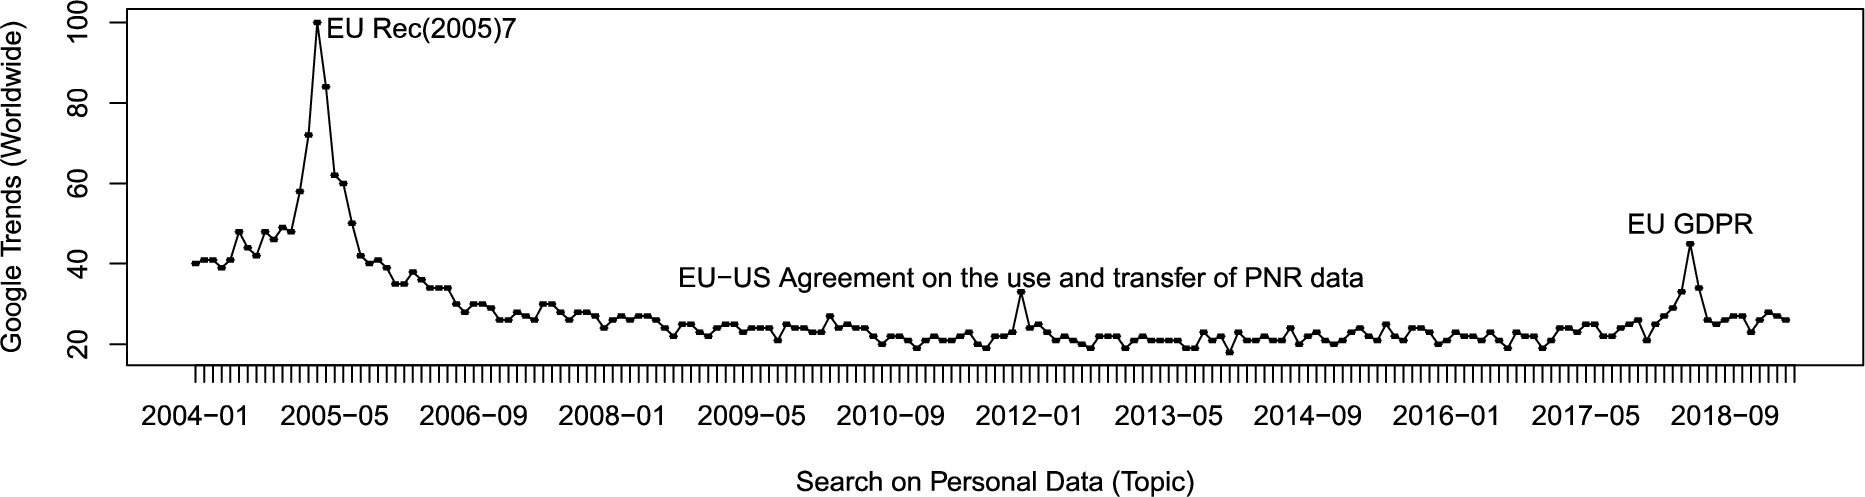 The term “Personal Data” – Google global search trends reached peaks that coincide with relevant events related to EU policy for protecting privacy.